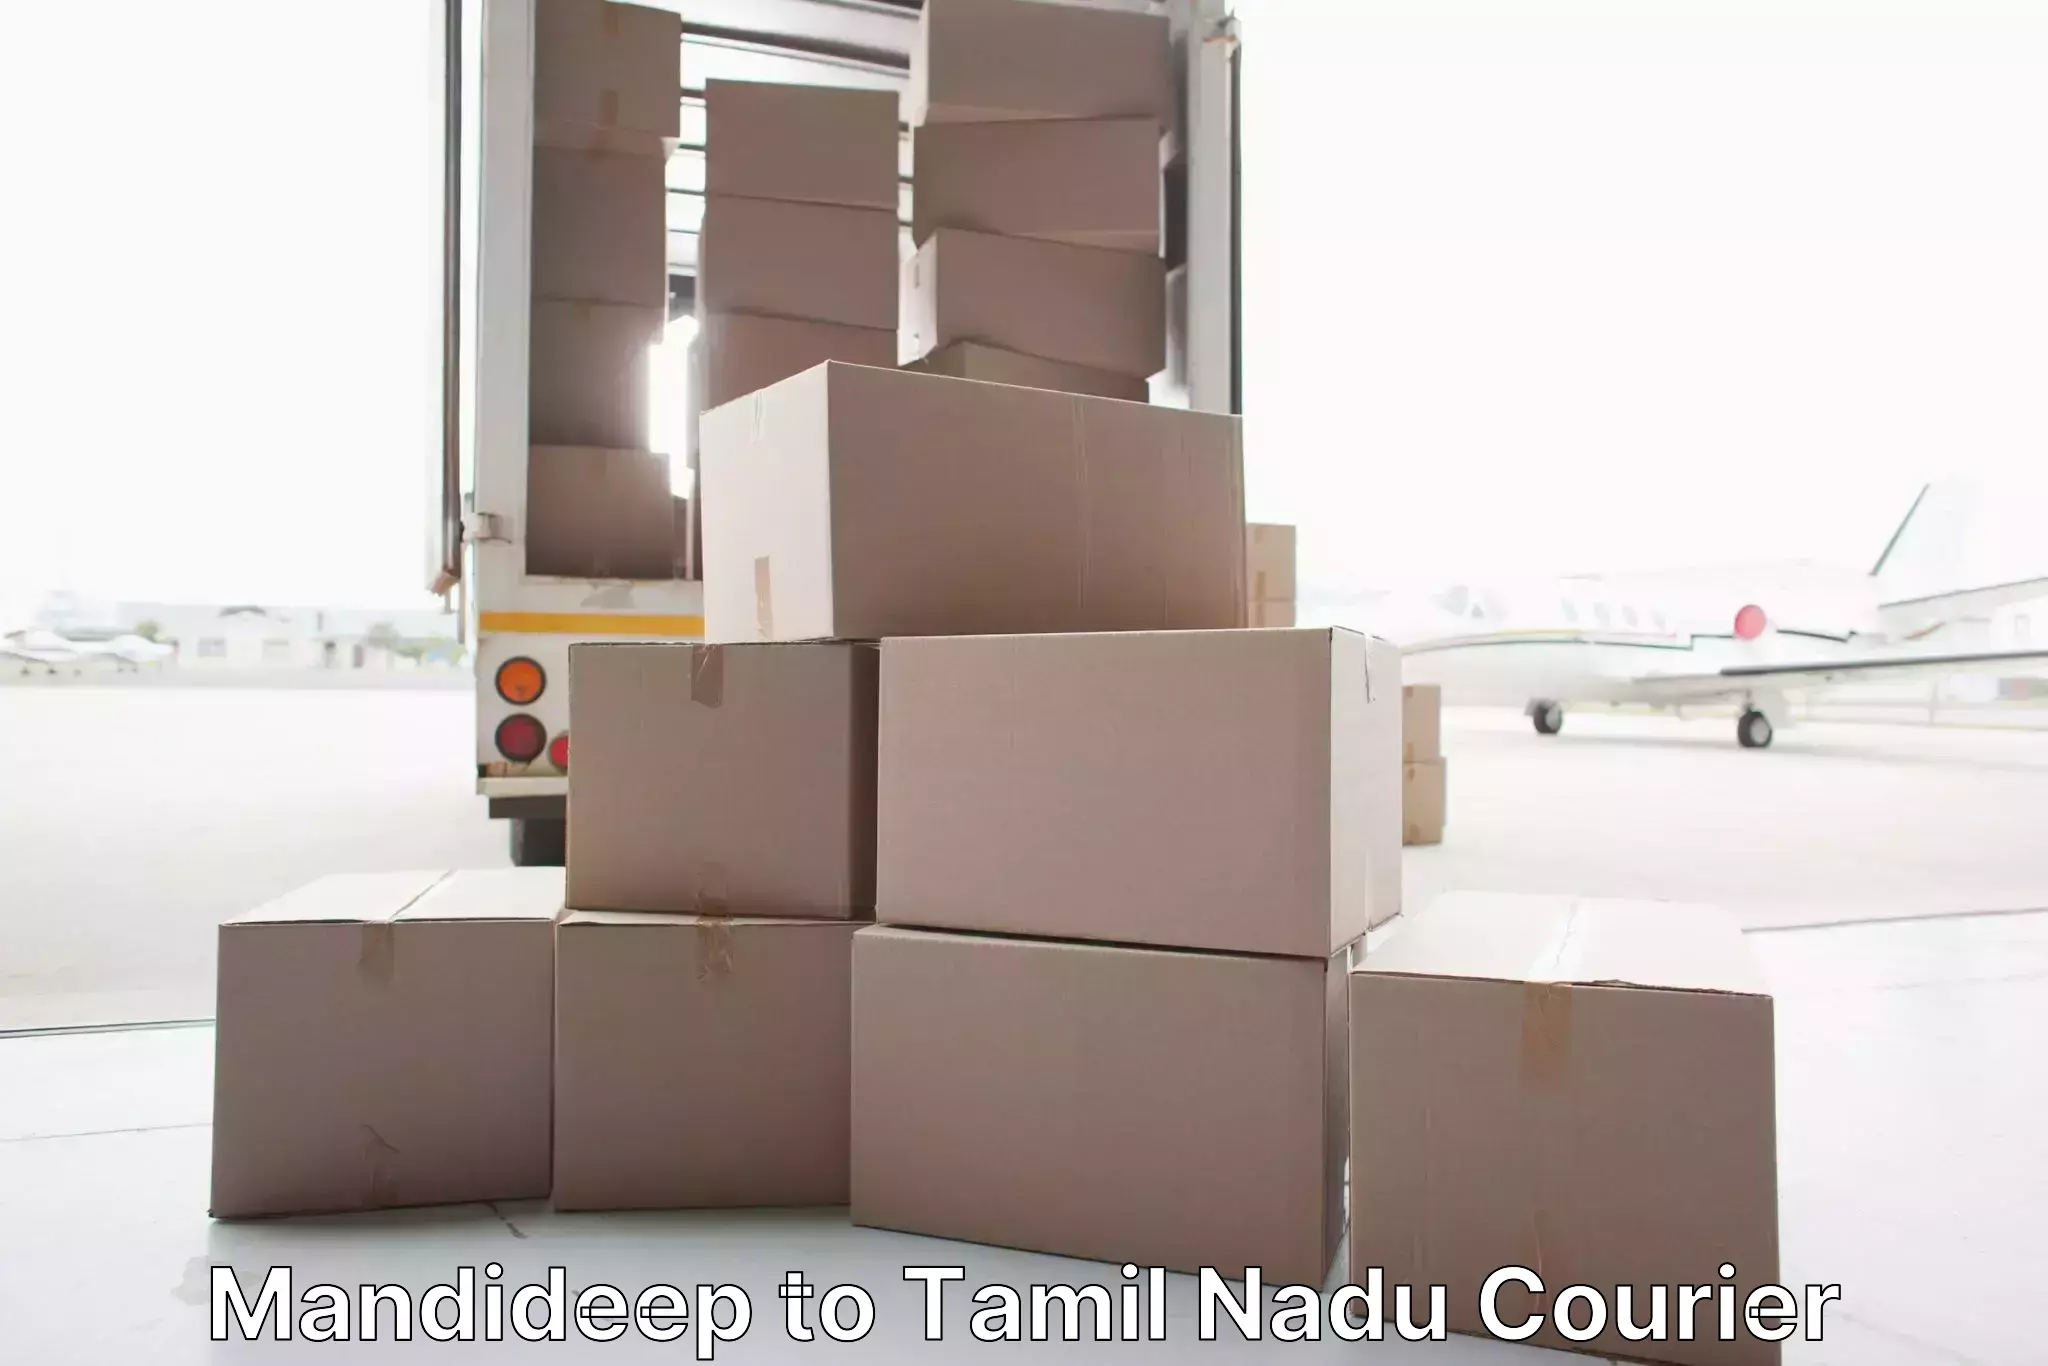 Full-service movers in Mandideep to Tamil Nadu